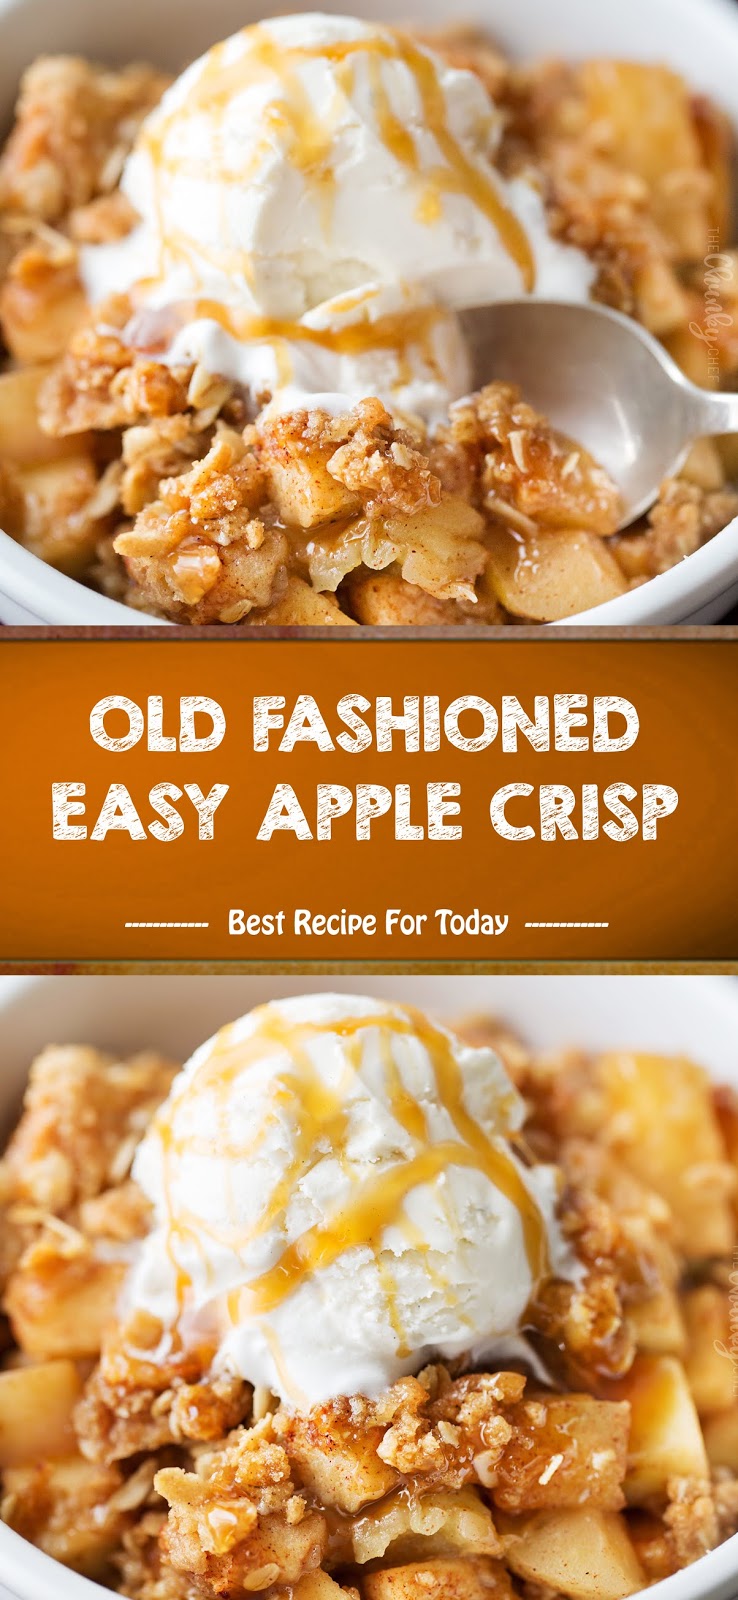 exotic jewelry: OLD FASHIONED EASY APPLE CRISP